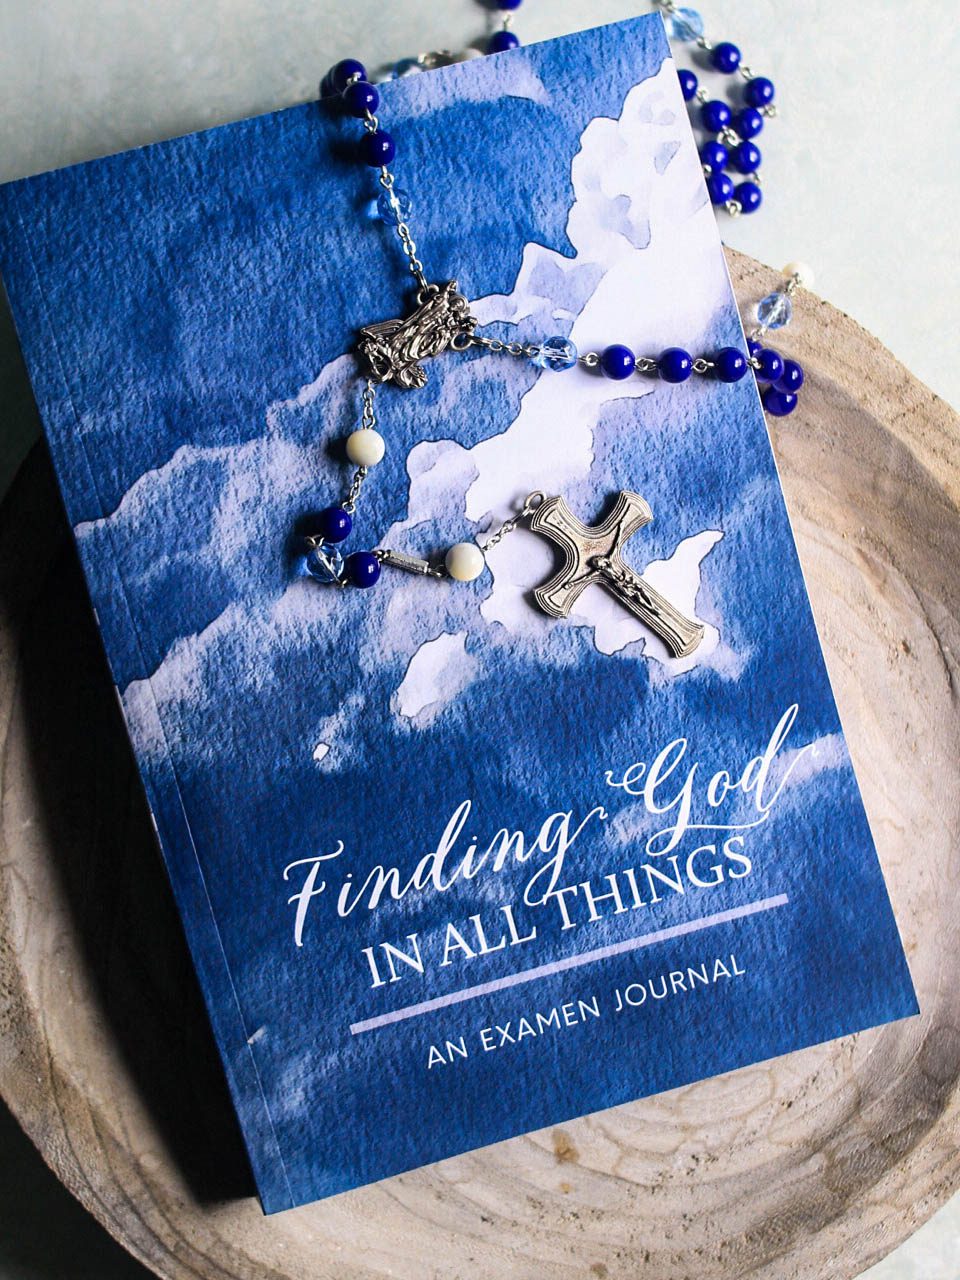 The Daily Examen – Find God in All Things